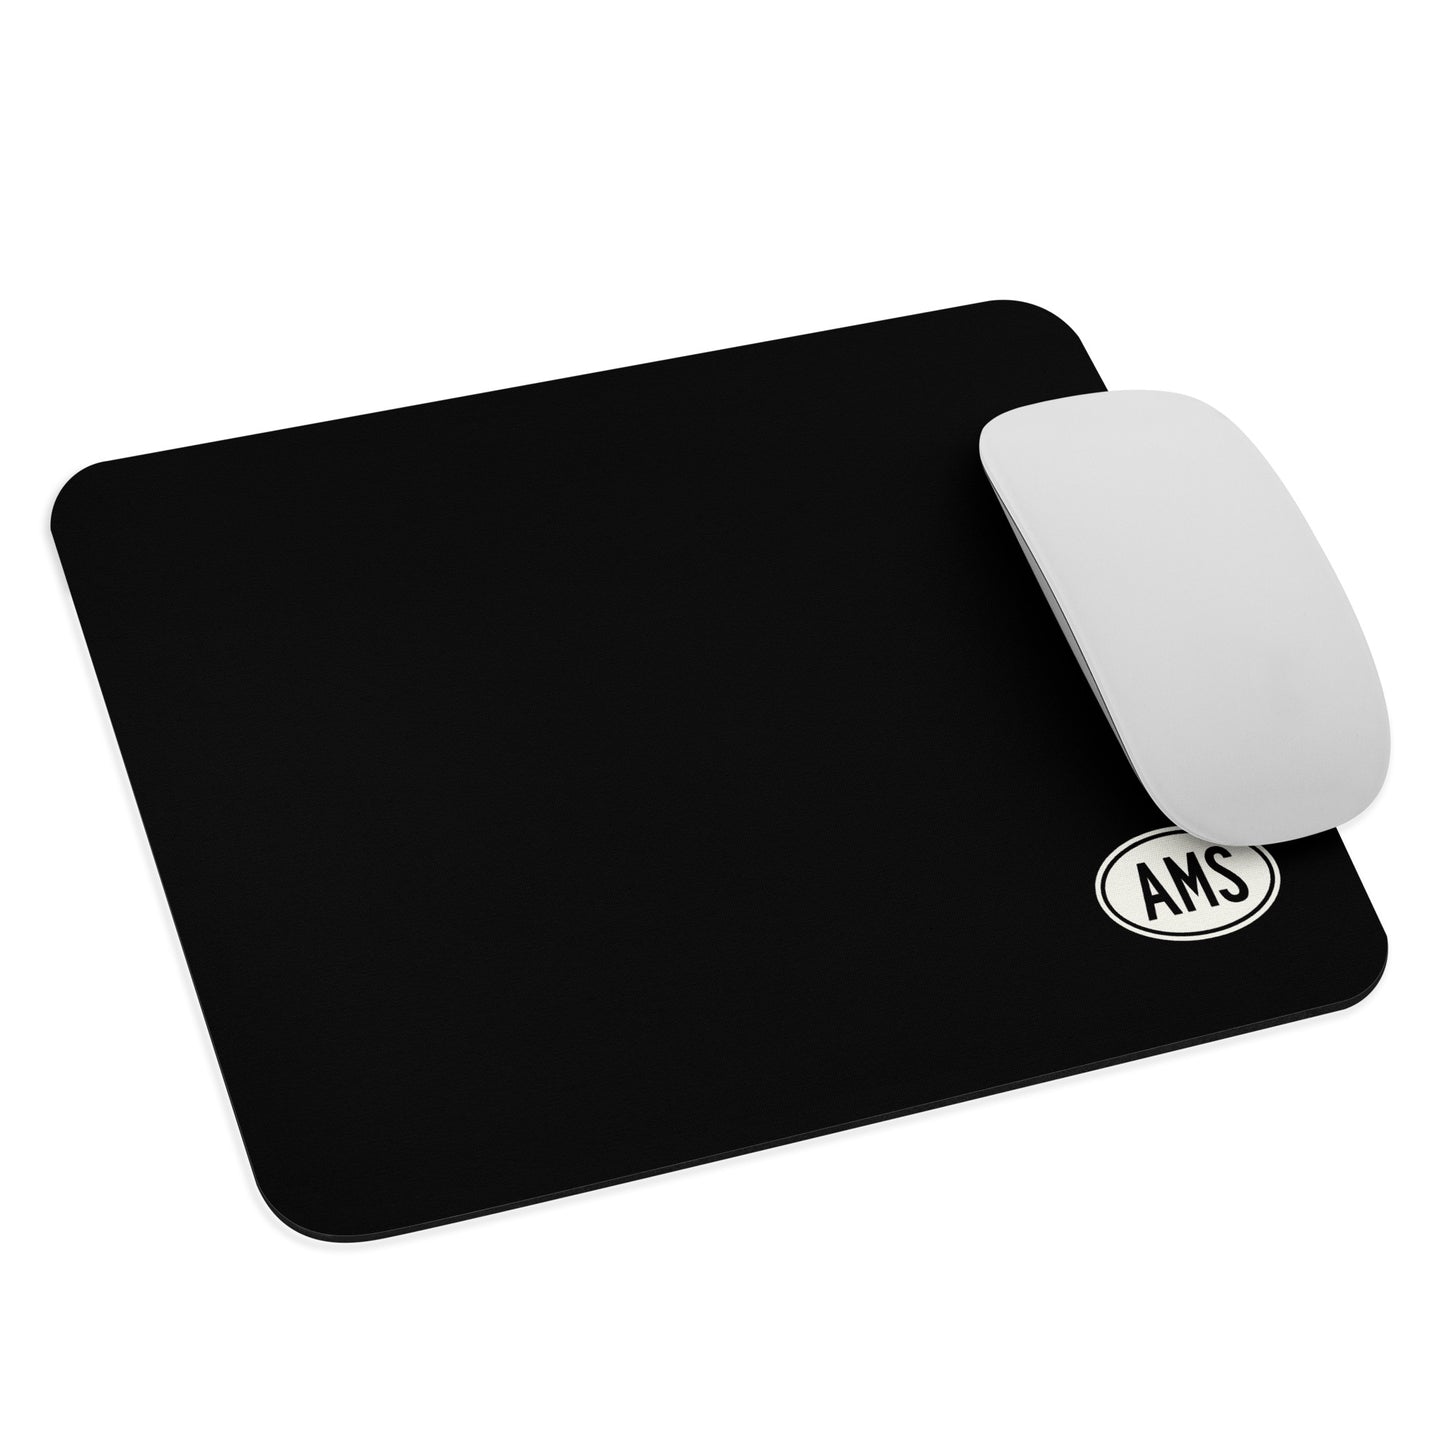 Unique Travel Gift Mouse Pad - White Oval • AMS Amsterdam • YHM Designs - Image 03